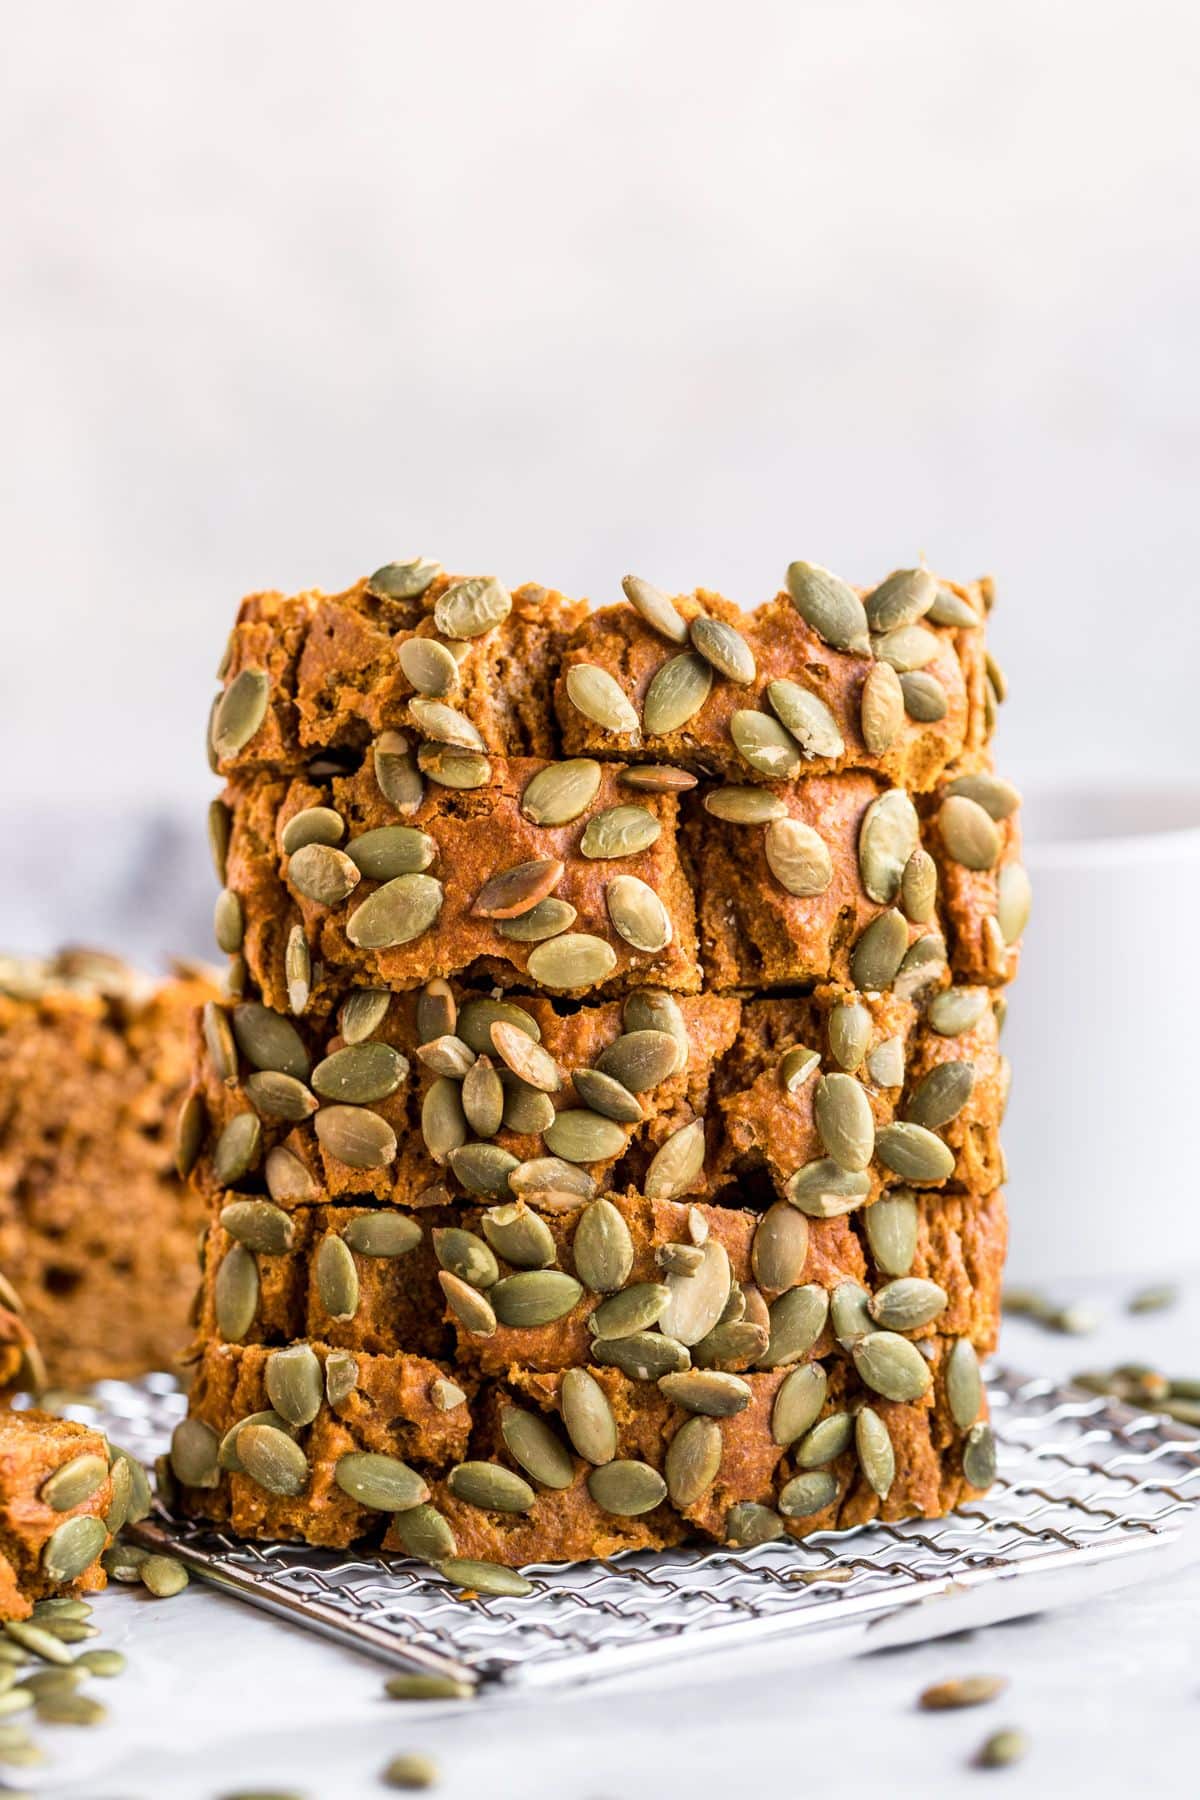 Slices of paleo pumpkin bread stacked on top of each other on a wire rack.